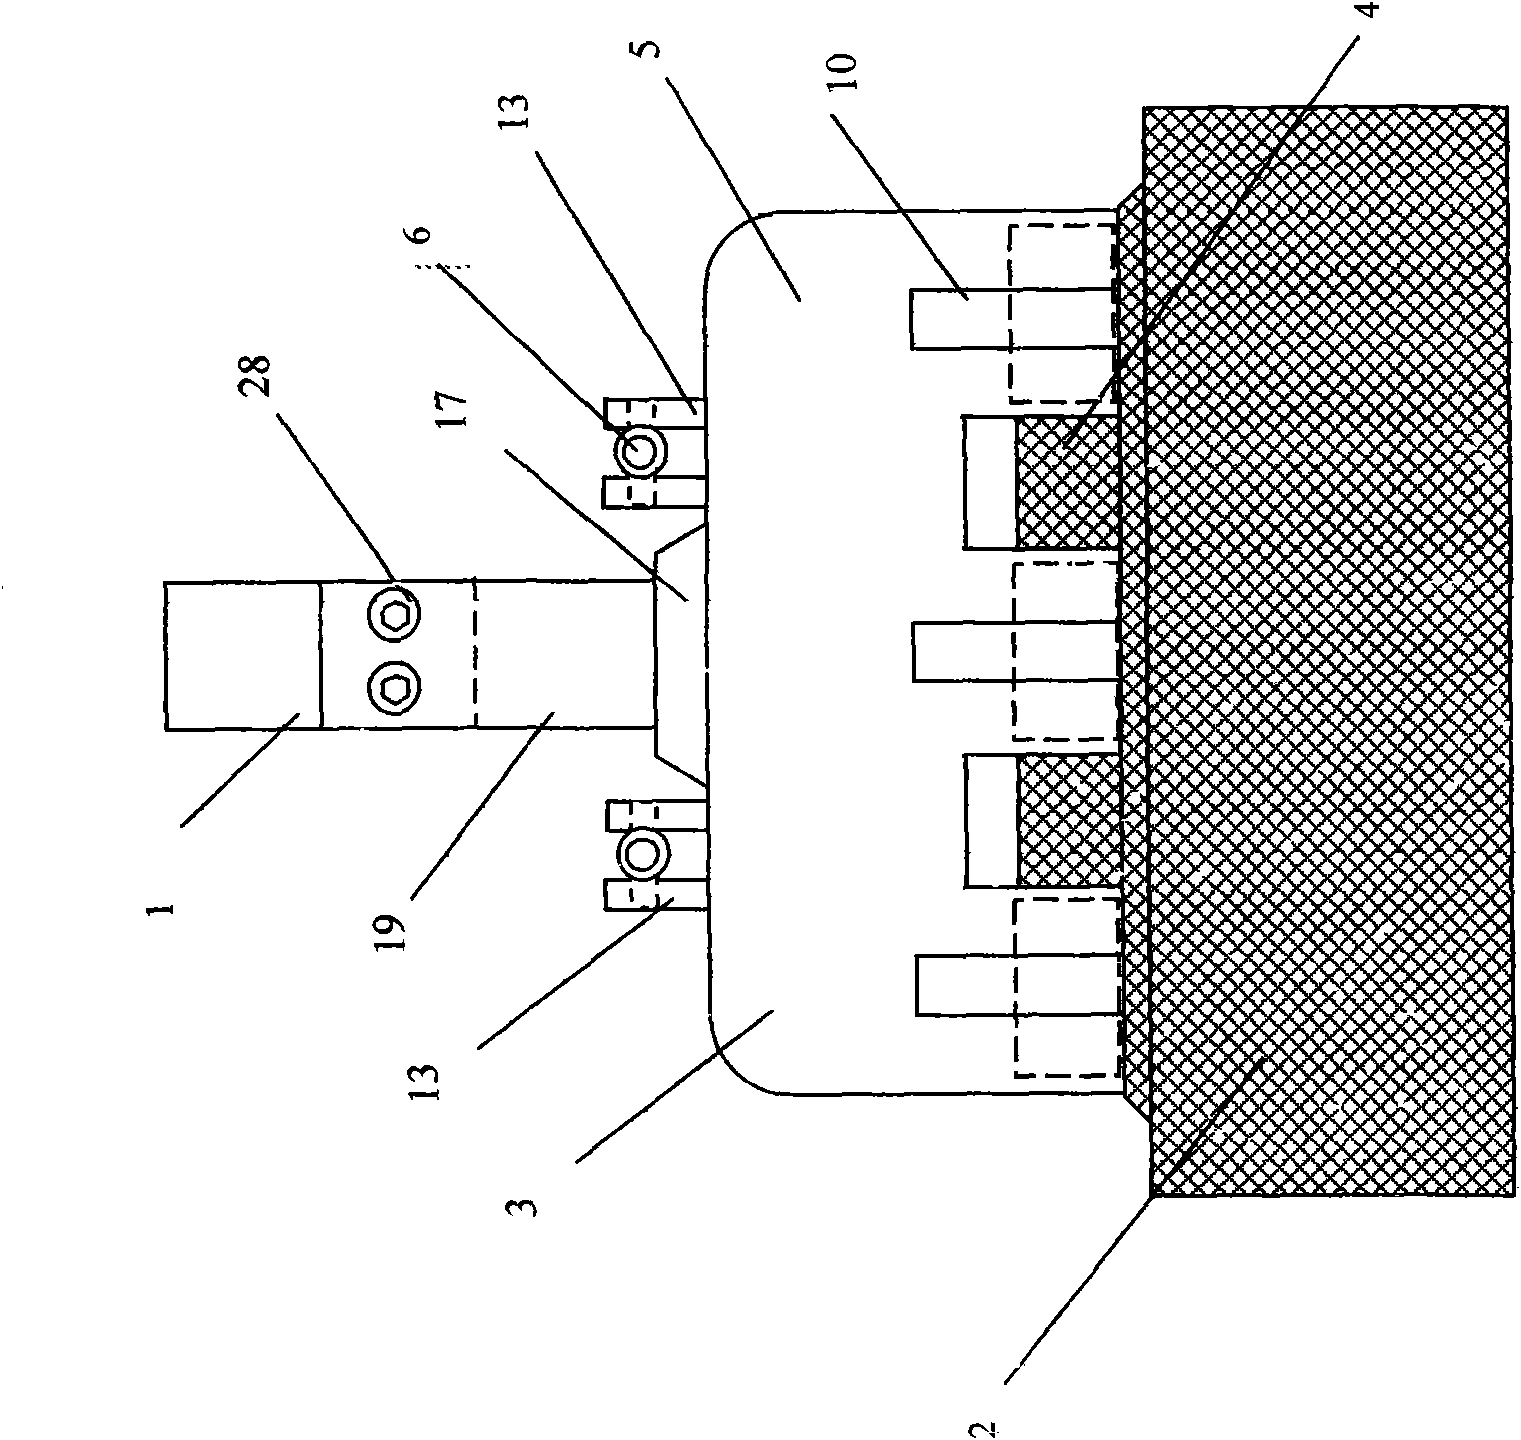 Novel anode electric-conducting device for aluminum electrolytic cell